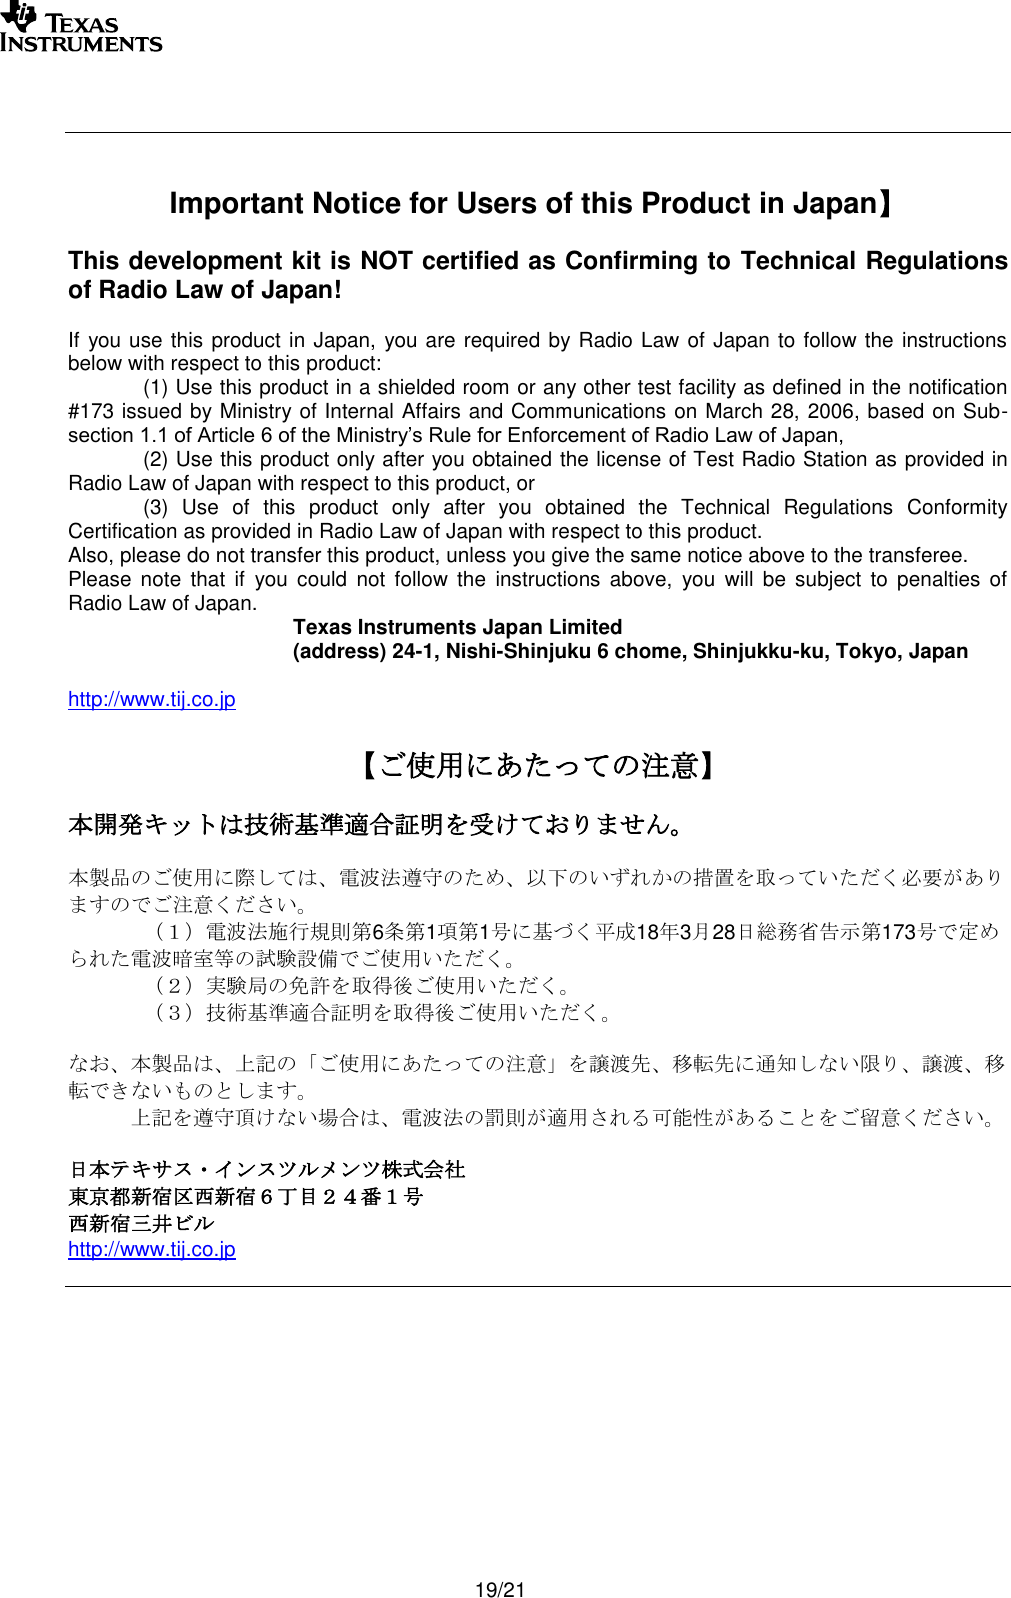       19/21     Important Notice for Users of this Product in Japan】  This development kit is NOT certified as Confirming to Technical Regulations of Radio Law of Japan!  If you use this product in Japan, you are required by Radio Law of Japan to follow the instructions below with respect to this product:    (1) Use this product in a shielded room or any other test facility as defined in the notification #173 issued by Ministry of Internal Affairs and Communications on March 28, 2006, based on Sub-section 1.1 of Article 6 of the Ministry’s Rule for Enforcement of Radio Law of Japan,    (2) Use this product only after you obtained the license of Test Radio Station as provided in Radio Law of Japan with respect to this product, or   (3)  Use  of  this  product  only  after  you  obtained  the  Technical  Regulations  Conformity Certification as provided in Radio Law of Japan with respect to this product.  Also, please do not transfer this product, unless you give the same notice above to the transferee. Please  note  that  if  you could  not  follow  the  instructions  above,  you  will  be  subject  to  penalties  of Radio Law of Japan.   Texas Instruments Japan Limited   (address) 24-1, Nishi-Shinjuku 6 chome, Shinjukku-ku, Tokyo, Japan  http://www.tij.co.jp  【ご使用にあたっての注意】  本開発キットは技術基準適合証明を受けておりません。  本製品のご使用に際しては、電波法遵守のため、以下のいずれかの措置を取っていただく必要がありますのでご注意ください。  （１）電波法施行規則第6条第1項第1号に基づく平成18年3月28日総務省告示第173号で定められた電波暗室等の試験設備でご使用いただく。  （２）実験局の免許を取得後ご使用いただく。  （３）技術基準適合証明を取得後ご使用いただく。  なお、本製品は、上記の「ご使用にあたっての注意」を譲渡先、移転先に通知しない限り、譲渡、移転できないものとします。    上記を遵守頂けない場合は、電波法の罰則が適用される可能性があることをご留意ください。  日本テキサス・インスツルメンツ株式会社 東京都新宿区西新宿６丁目２４番１号 西新宿三井ビル http://www.tij.co.jp   